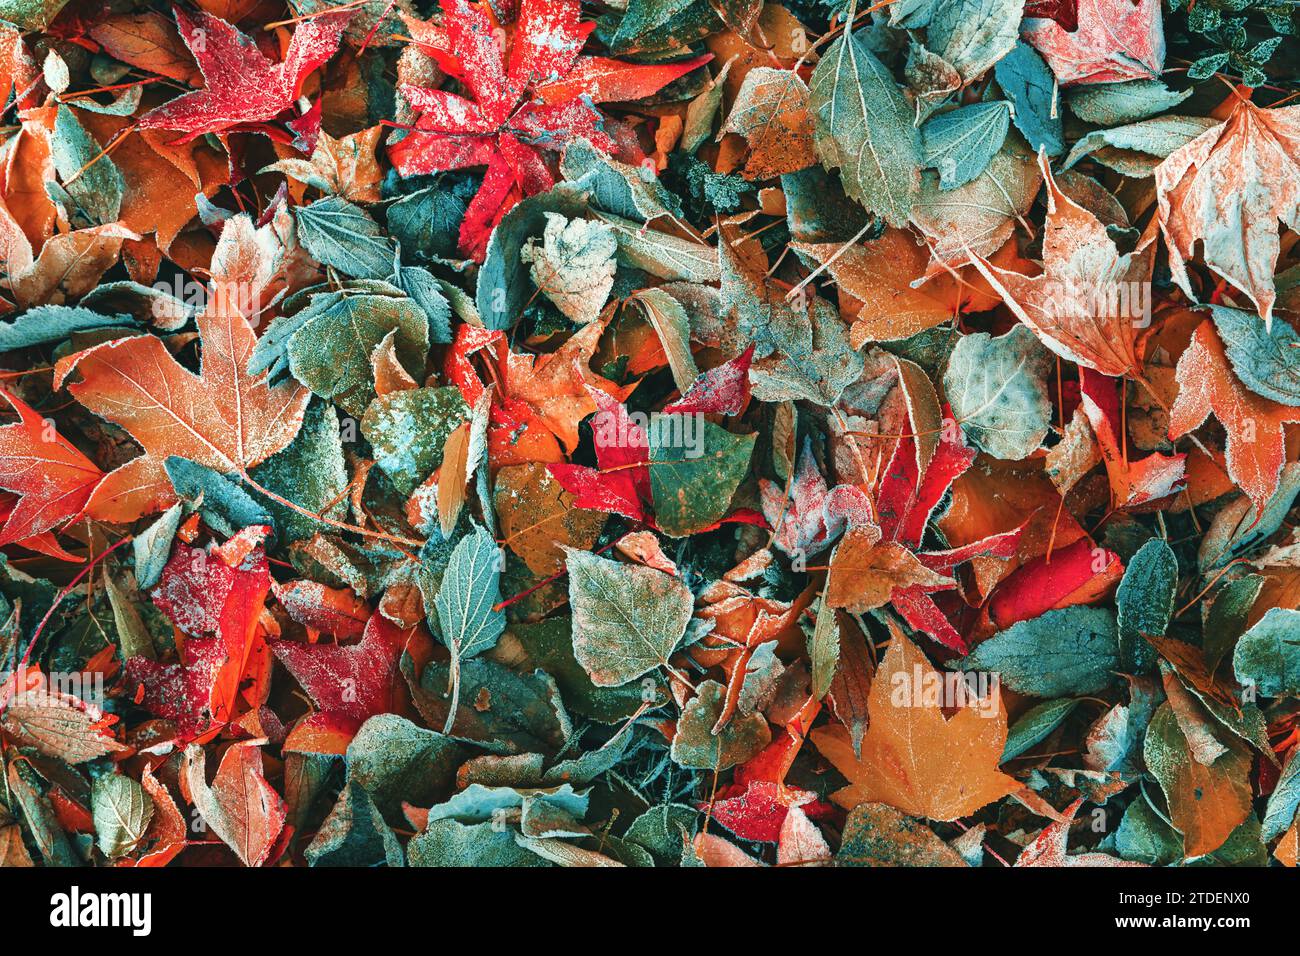 Frozen leaves on the ground in frosty winter morning, colorful autumnal foliage as background, directly above Stock Photo